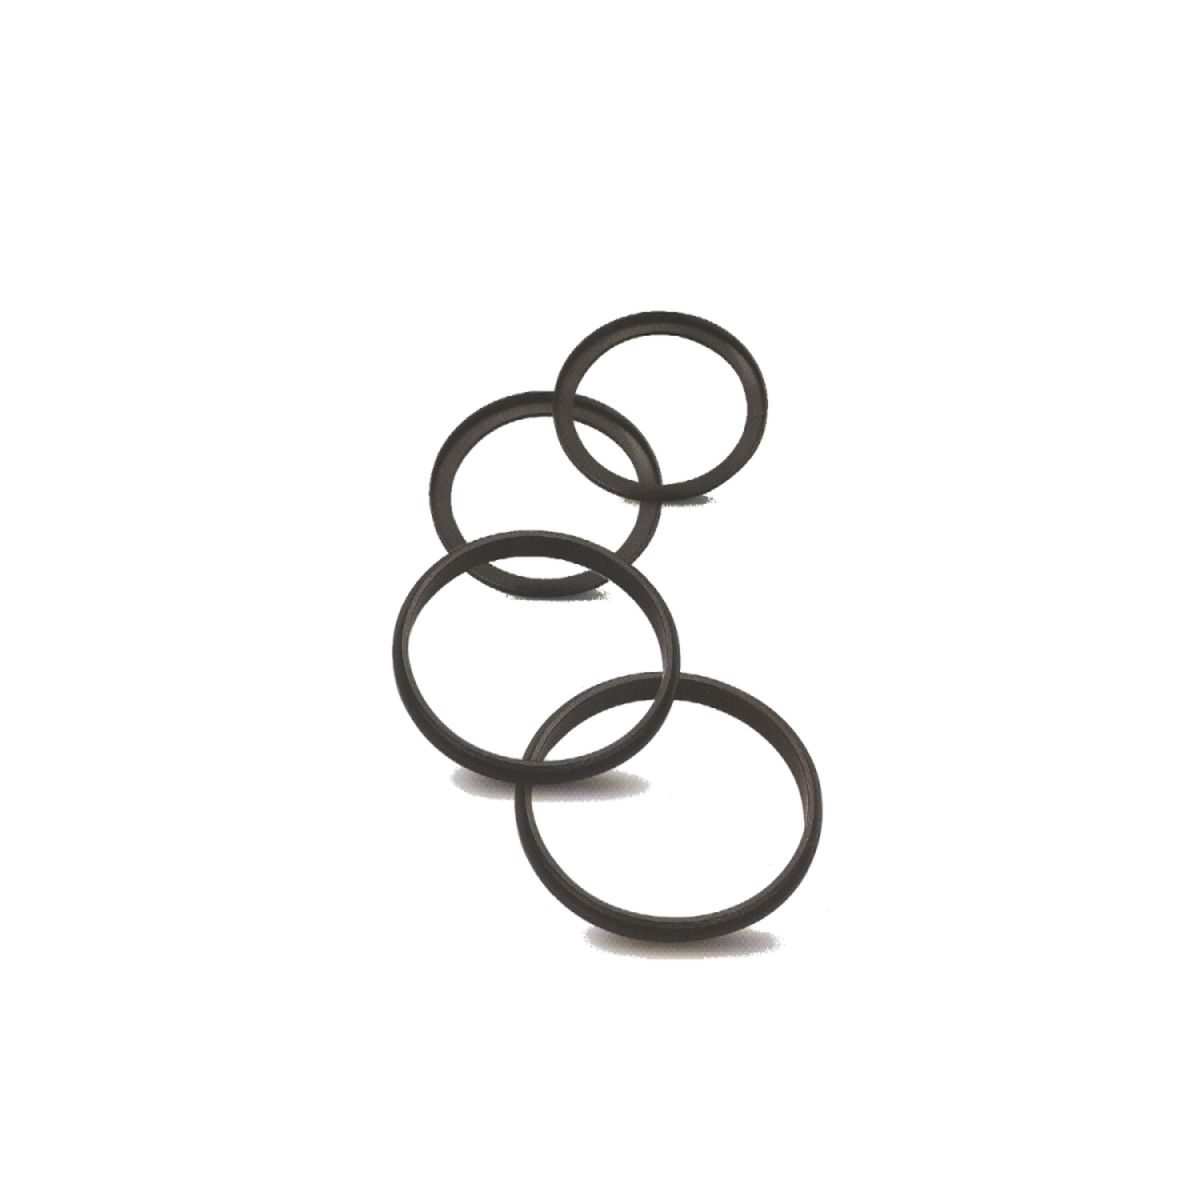 Caruba Step-up/down Ring 40.5mm - 46mm